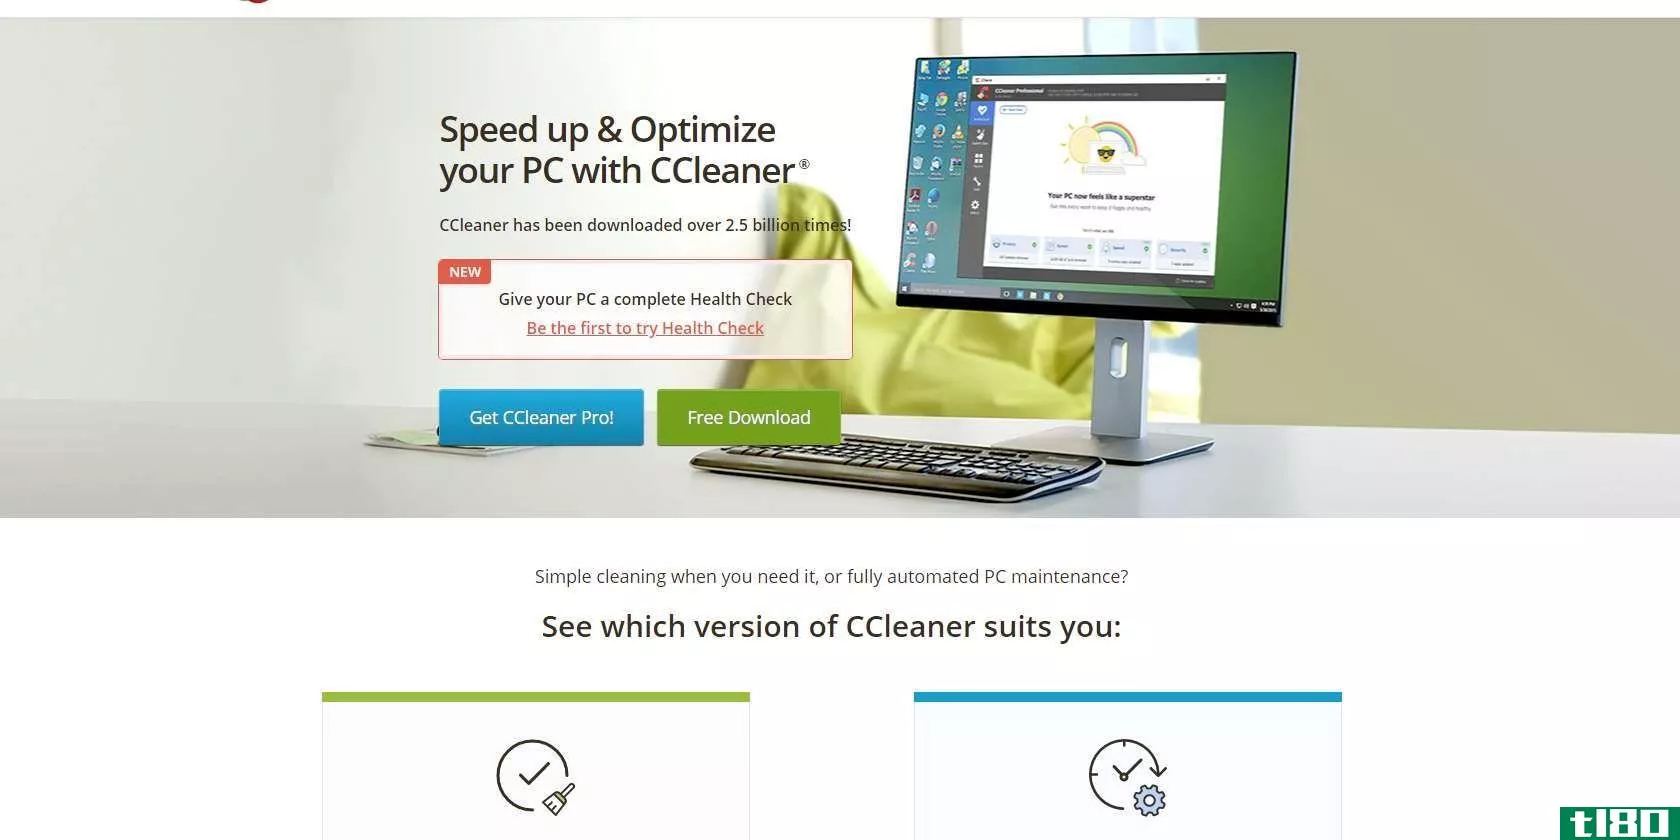 The CCleaner download page